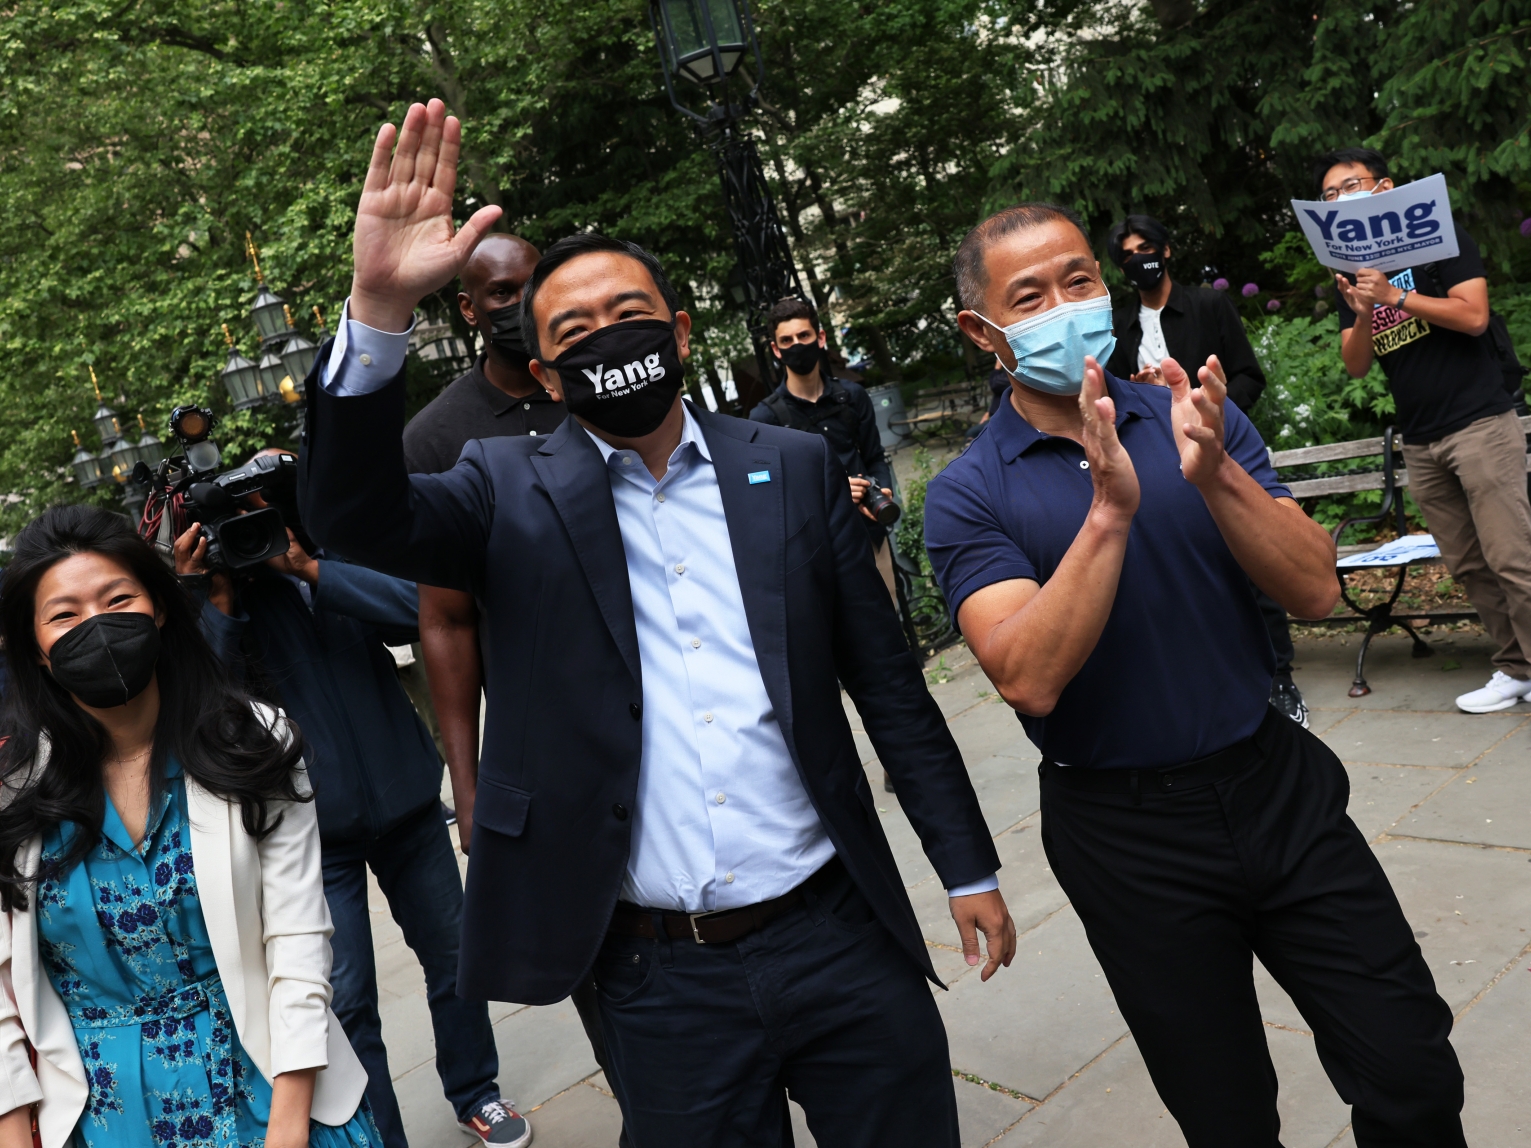 Andrew Yang during his mayoral run in New York City.